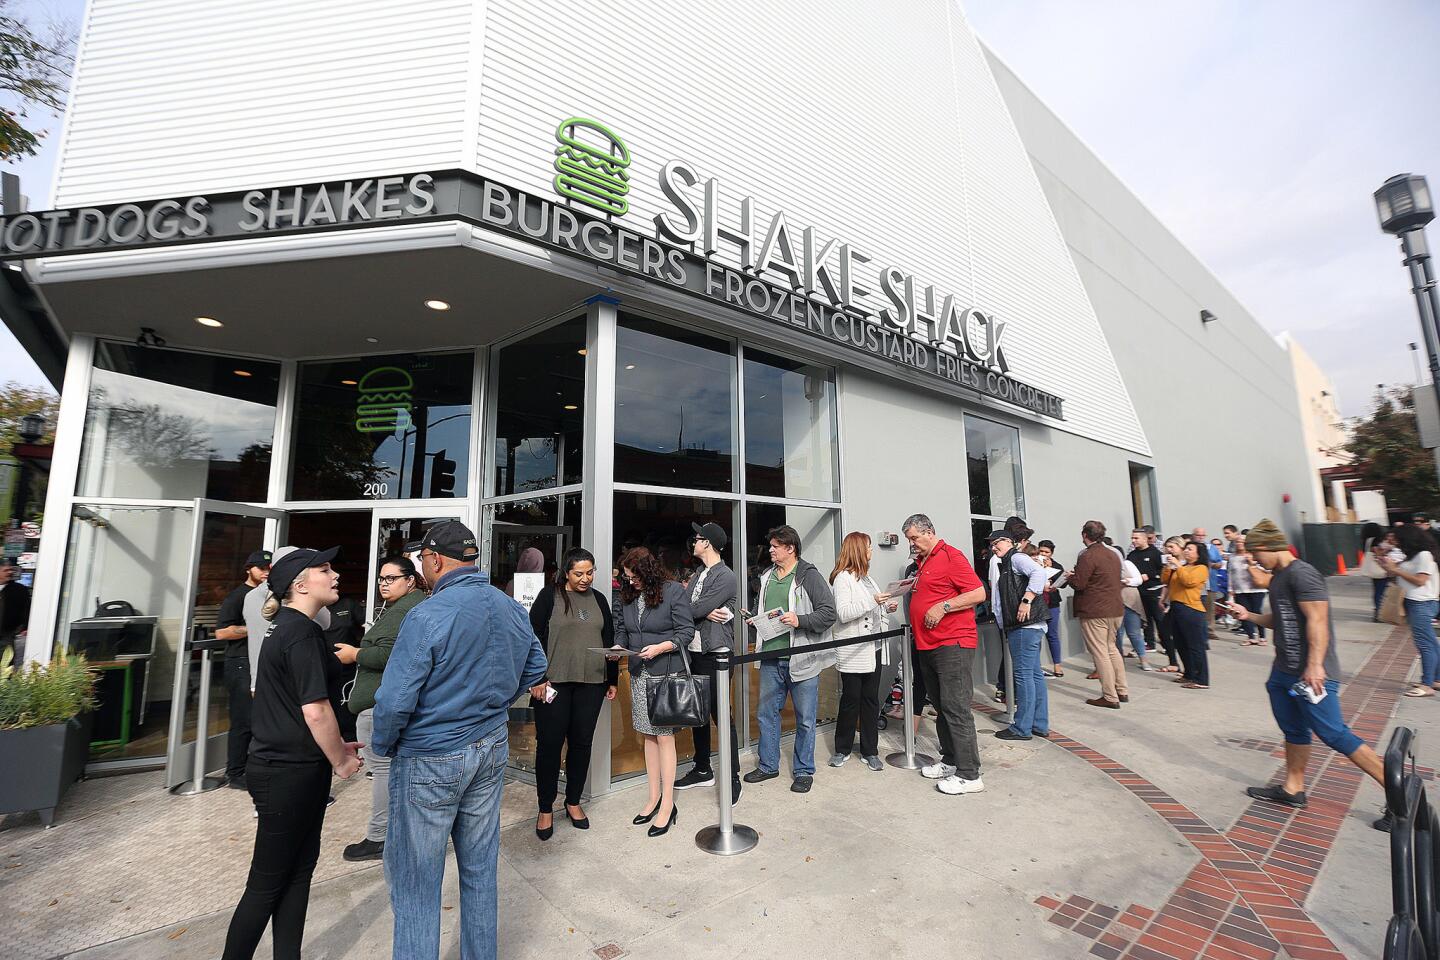 A fairly long line, residual from the ribbon cutting at a newly opened Shake Shack in Burbank on Monday, December 17, 2018. Dozens of people were in line for the ribbon cutting grand opening to be the first in Burbank to acquire the well-known burgers.